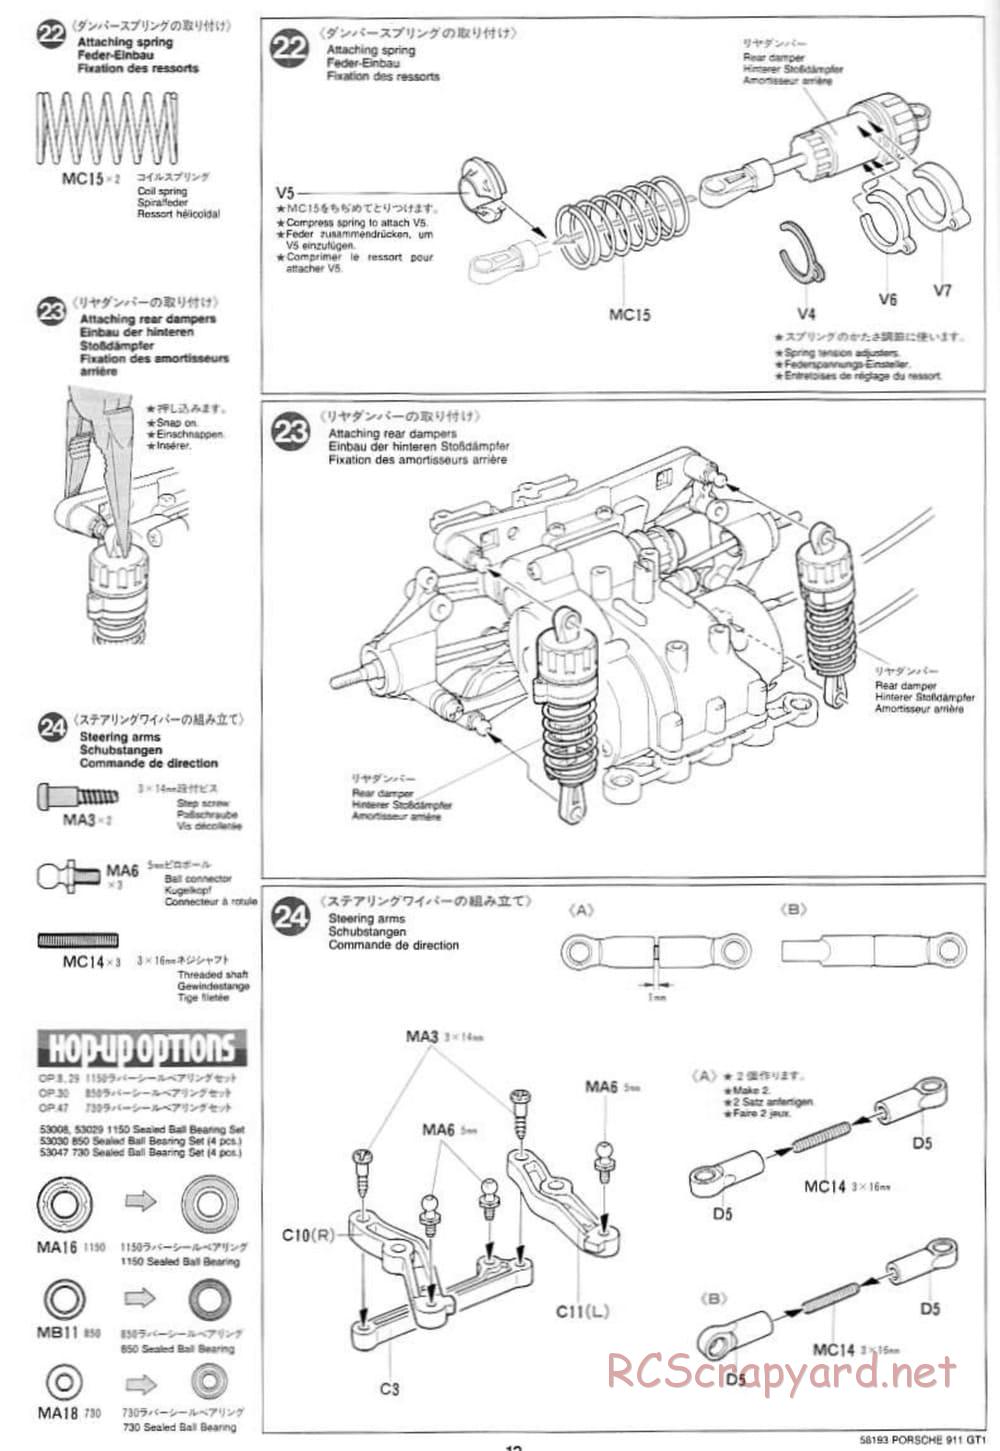 Tamiya - Porsche 911 GT1 - TA-03RS Chassis - Manual - Page 12